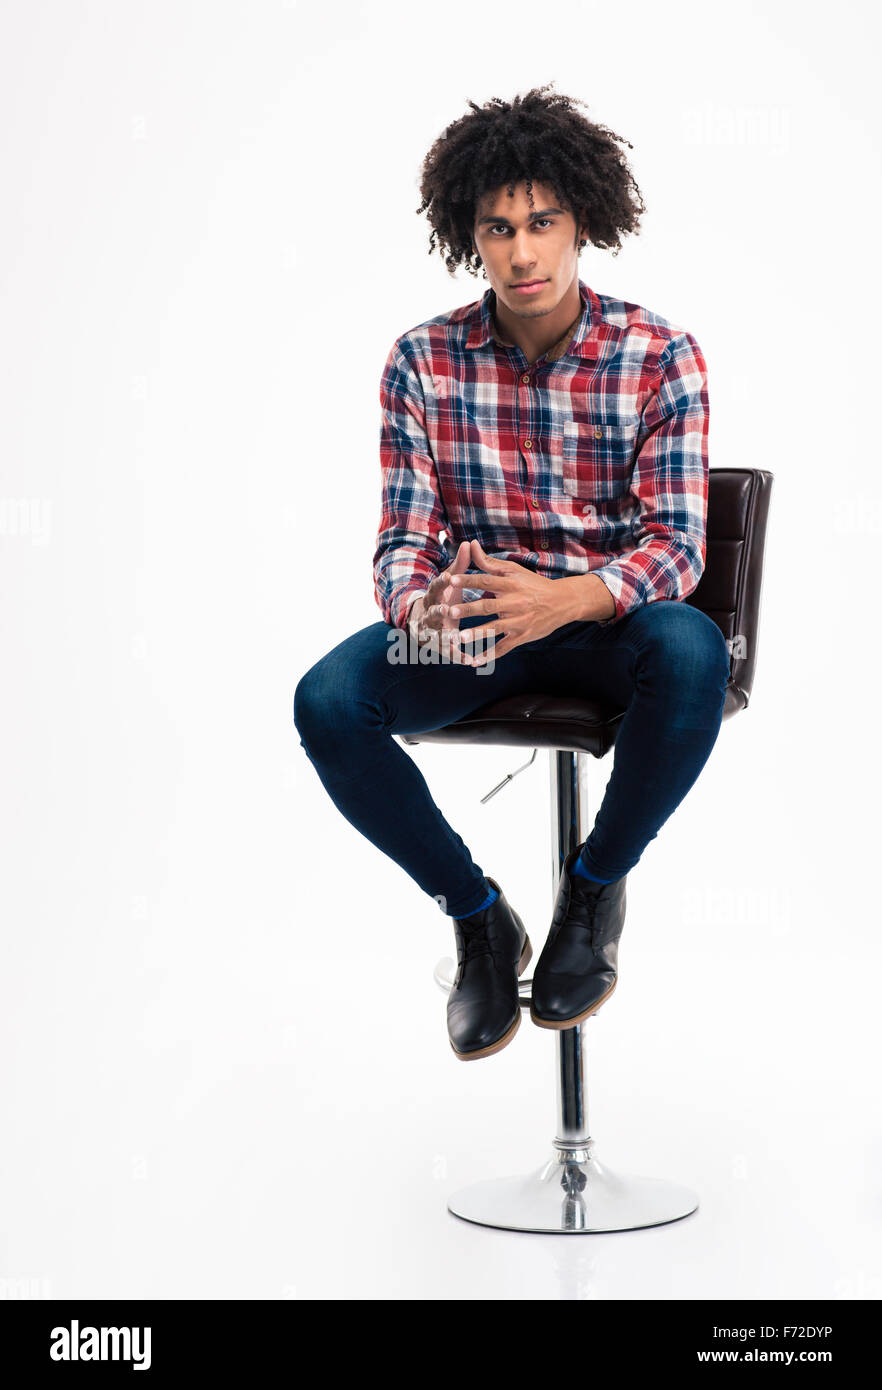 Full length portrait of a young man sitting on the chair isolated on a white background Stock Photo